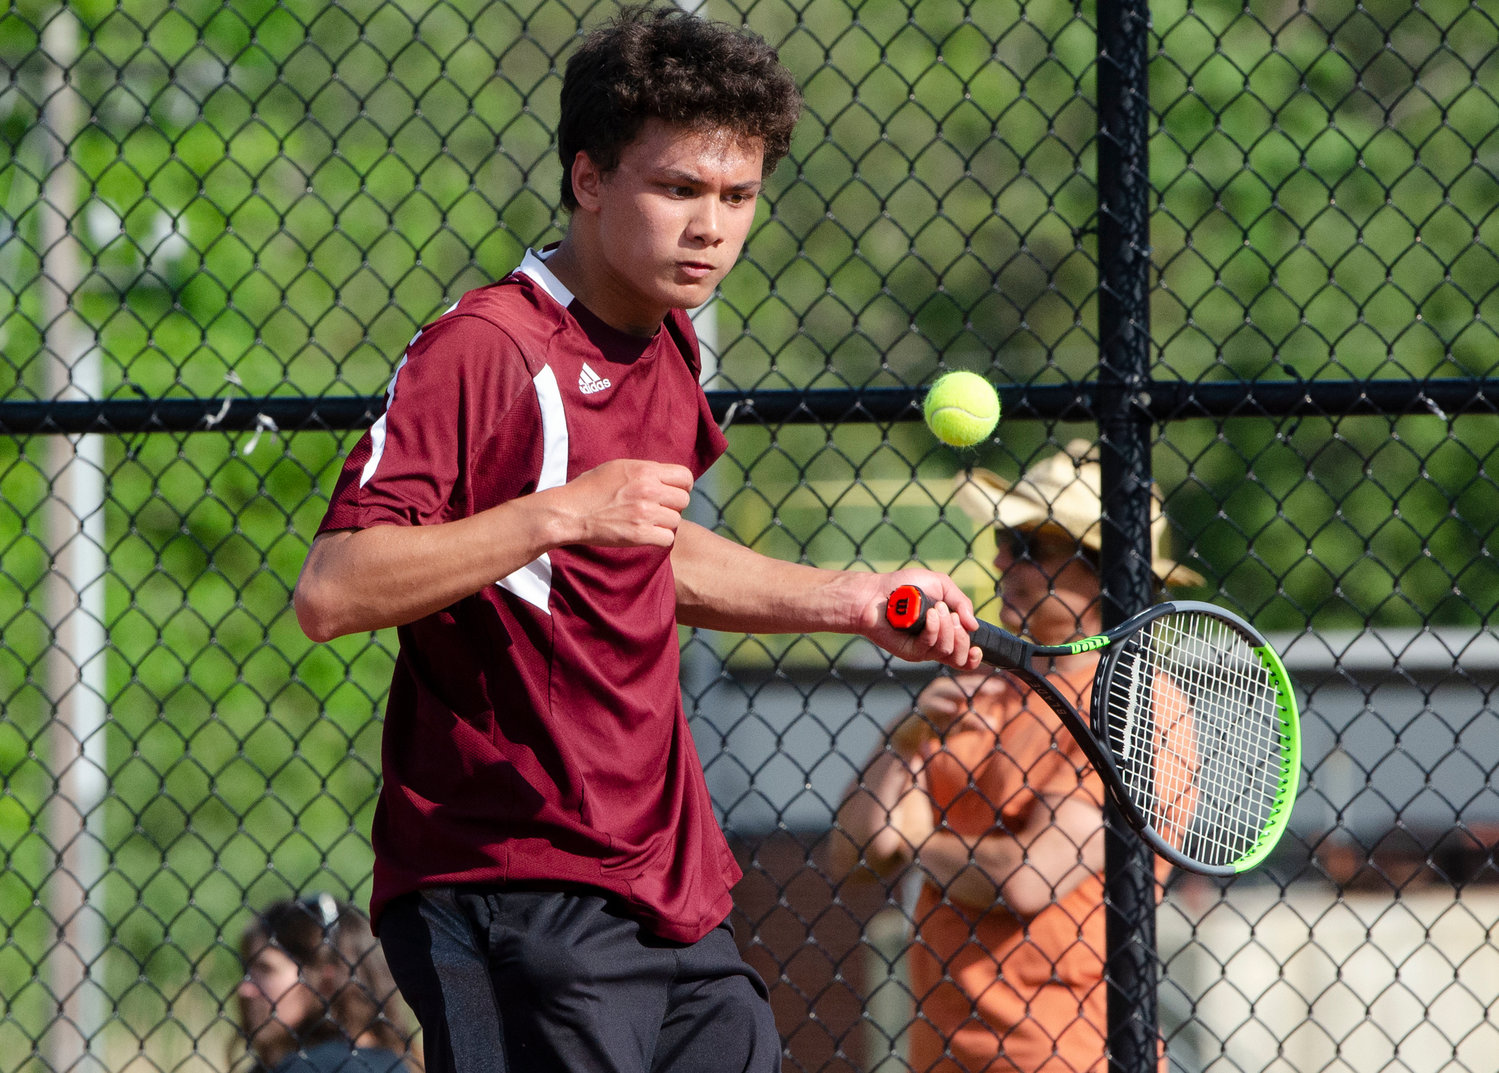 Fourth singles player Aaron DeGala beat Falcons' Jarred Angel, 6-1, 6-0, during their match on Monday night.